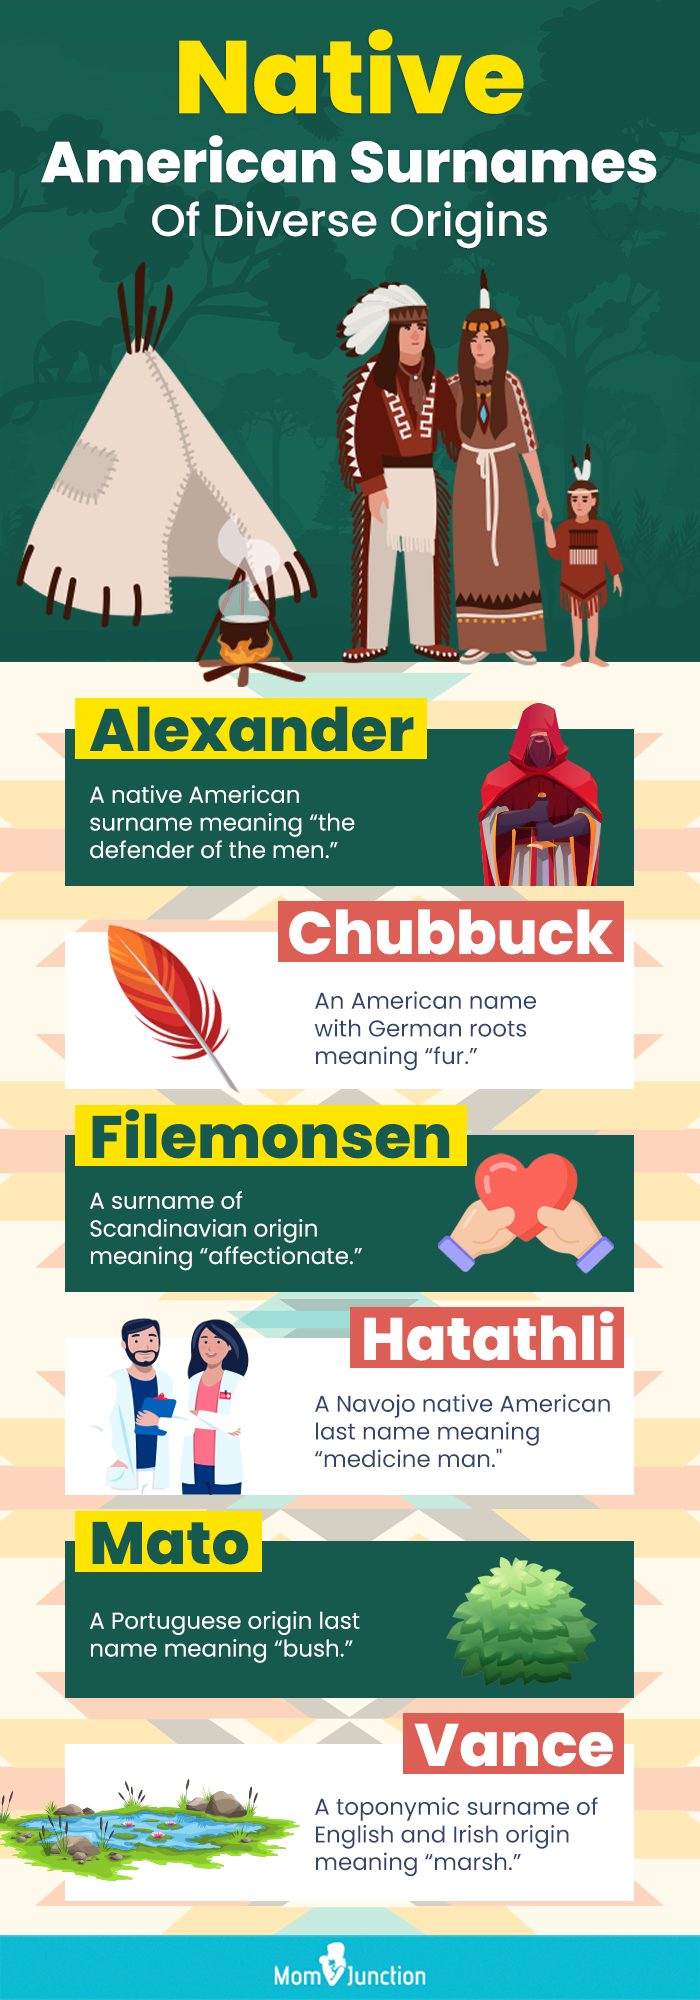 native american surnames of diverse origins (infographic)